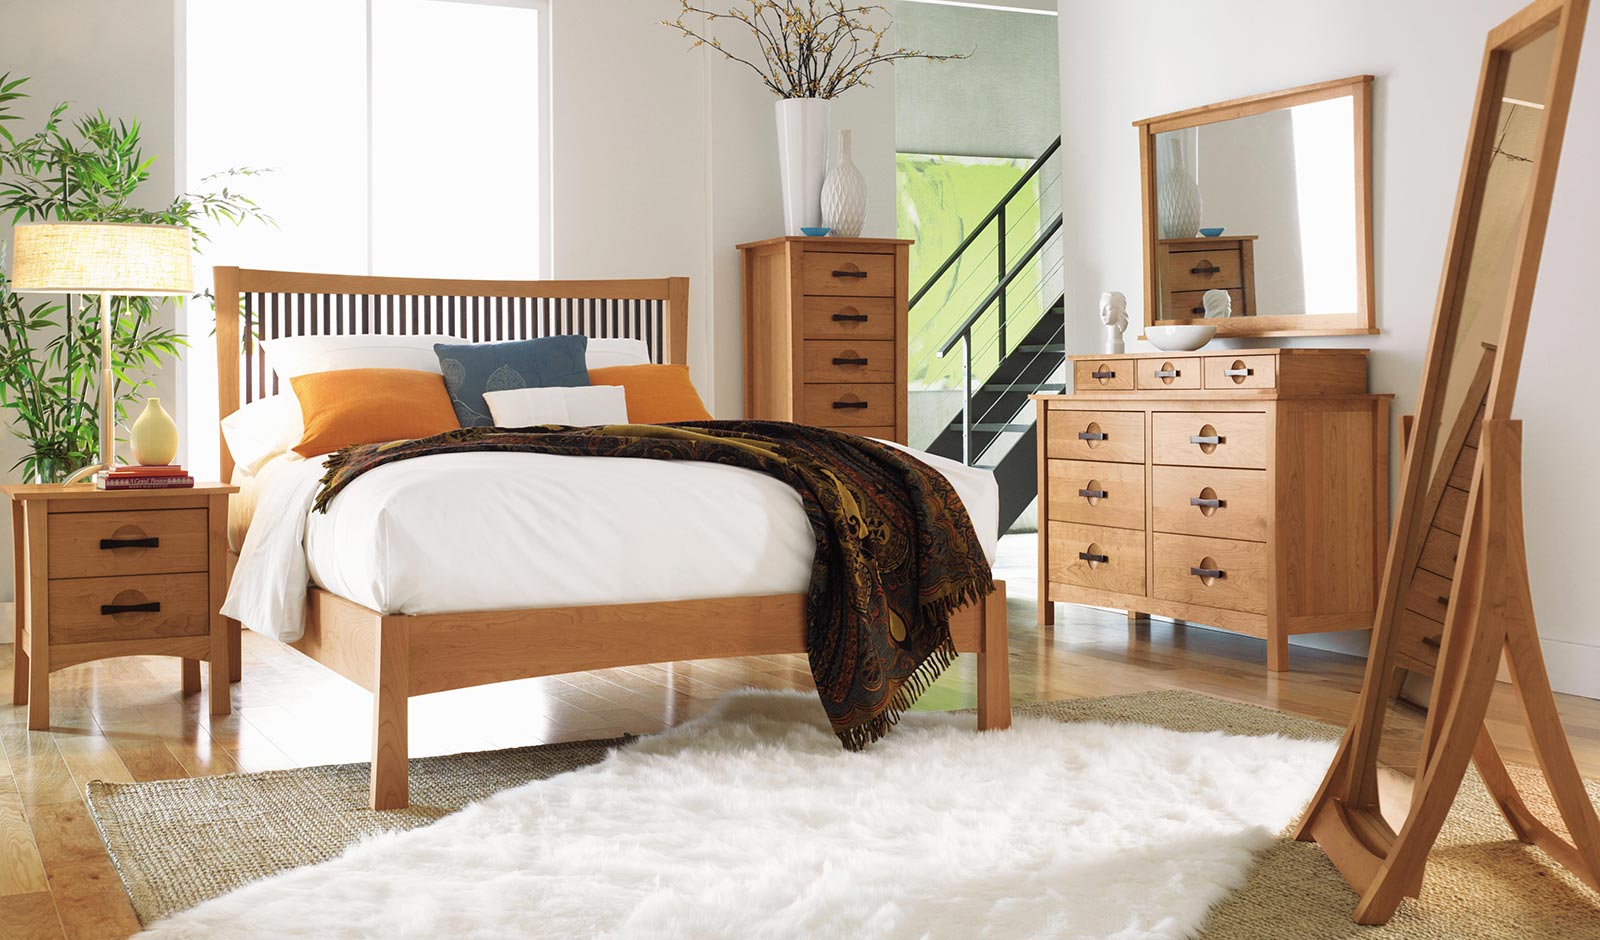 Berkeley Bedroom furniture in solid cherry from Copeland Furniture